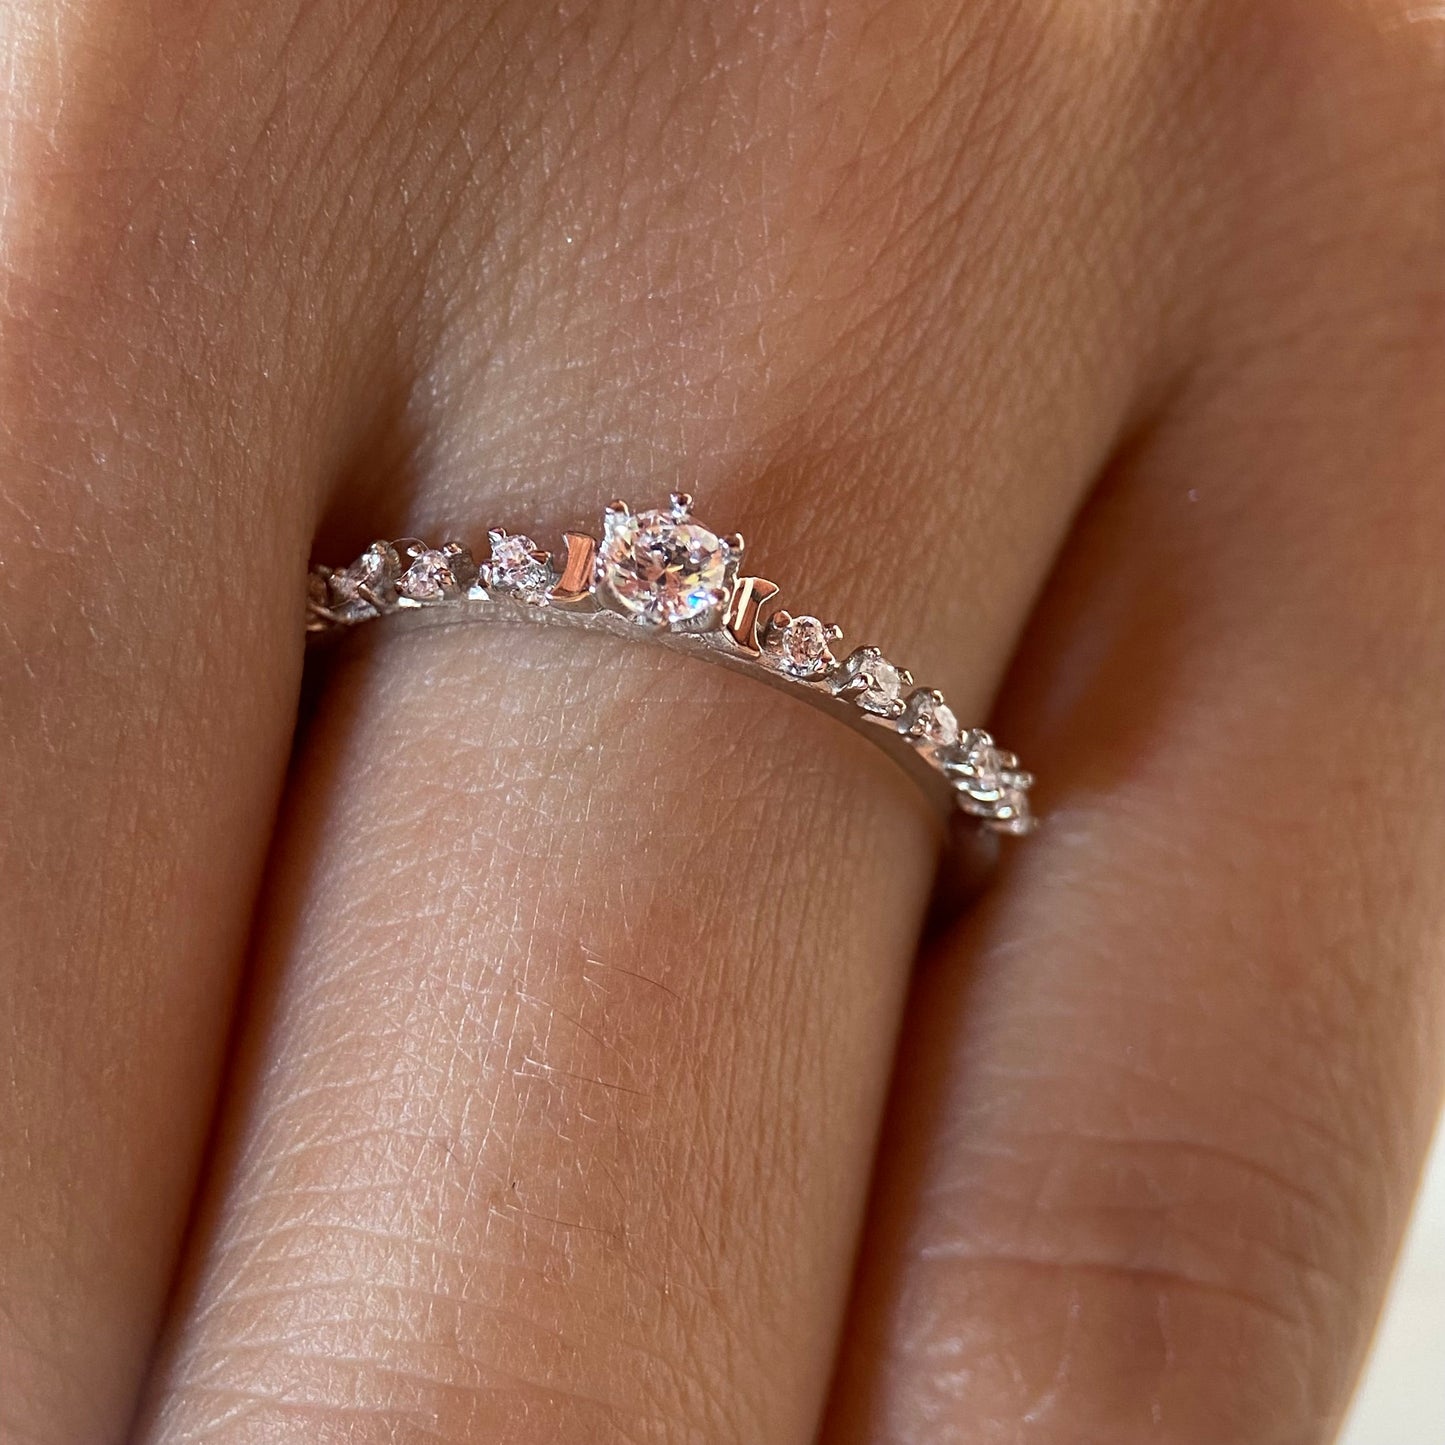 Danielle Ring in 14k White Gold with Diamond